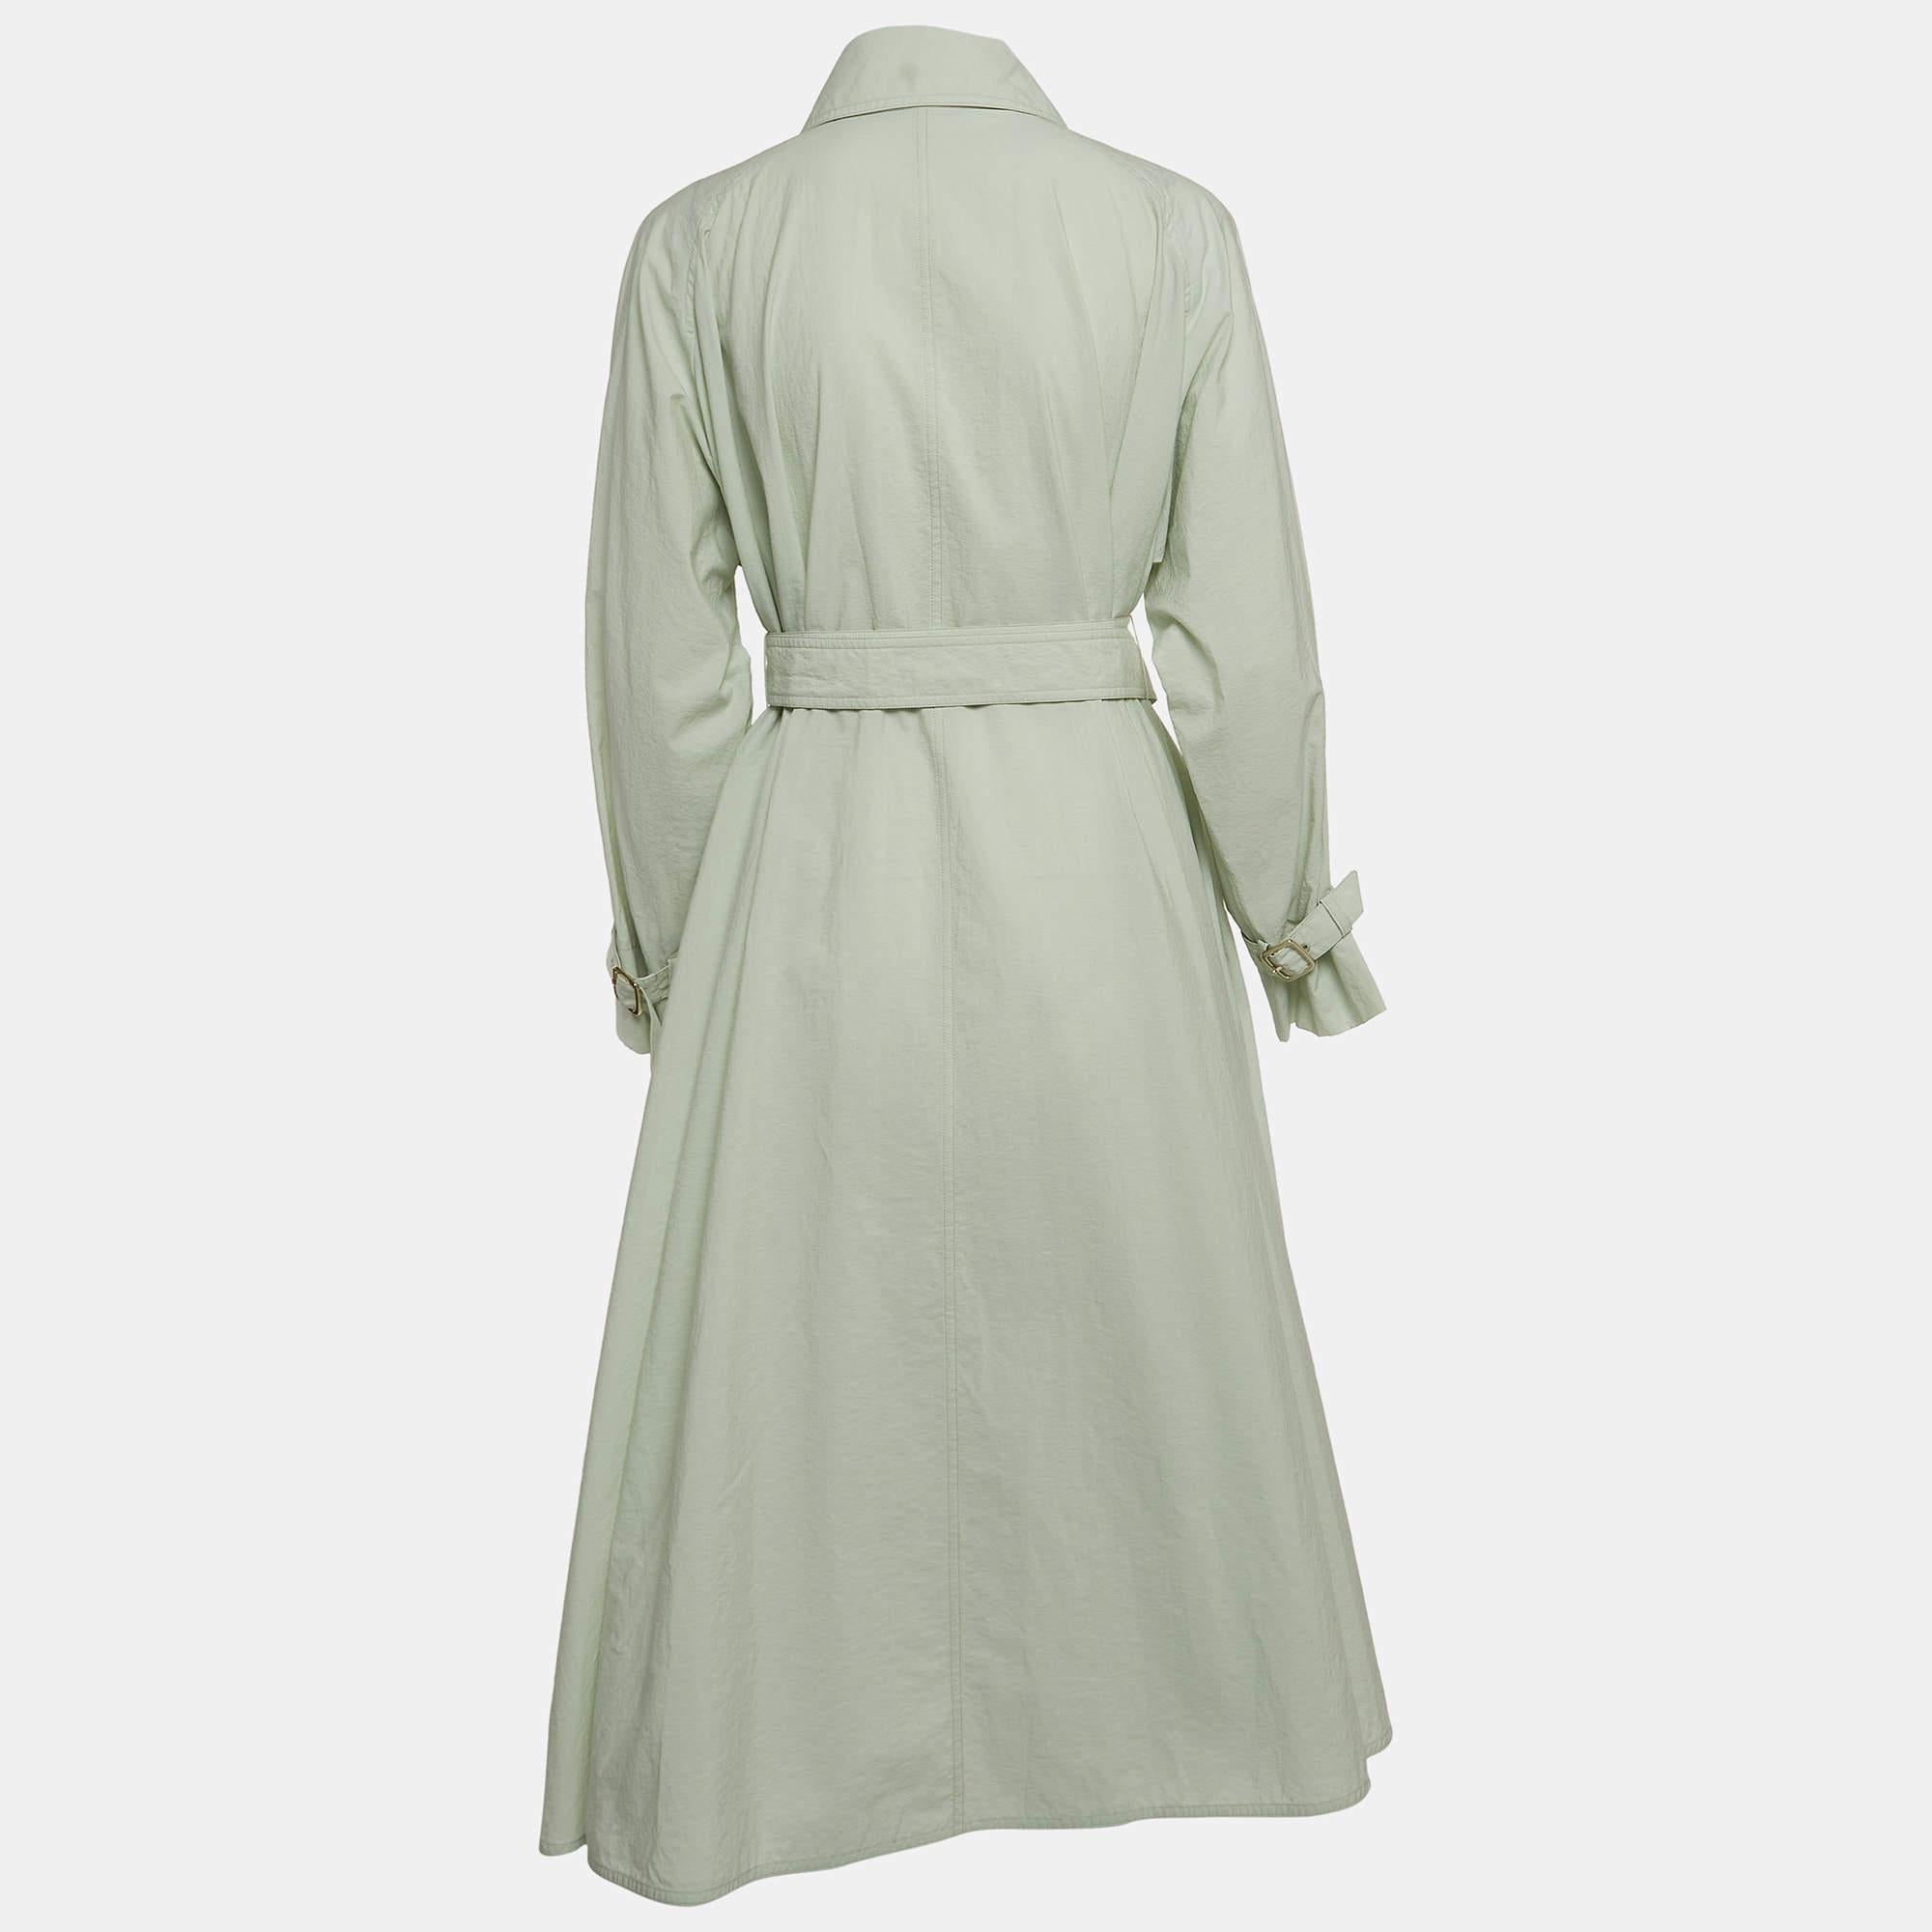 This creation from Max Mara is beauty tailored into a trench coat. It brings a charming light green to a design that is modern yet timeless. The appeal of the creation lies both in its construction process and end result. Cotton blend fabric is used